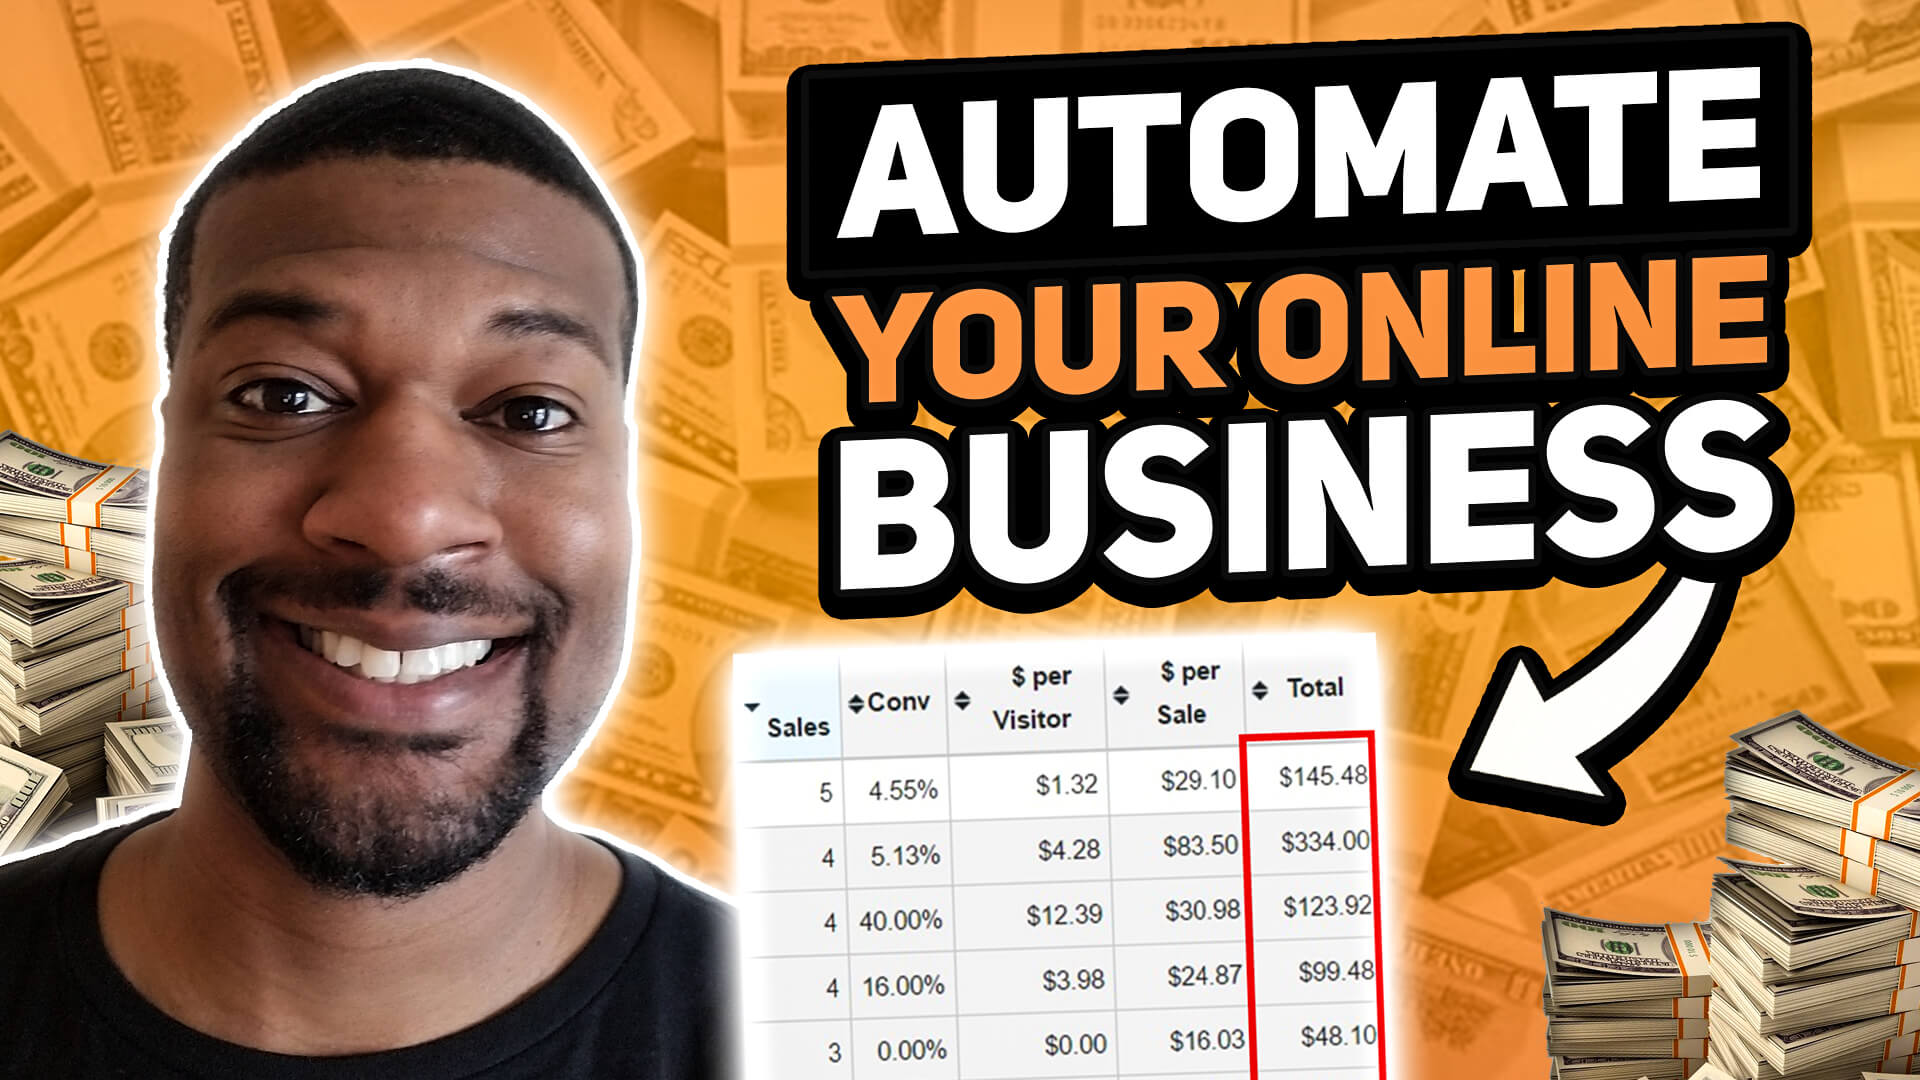 How to start an automated online business